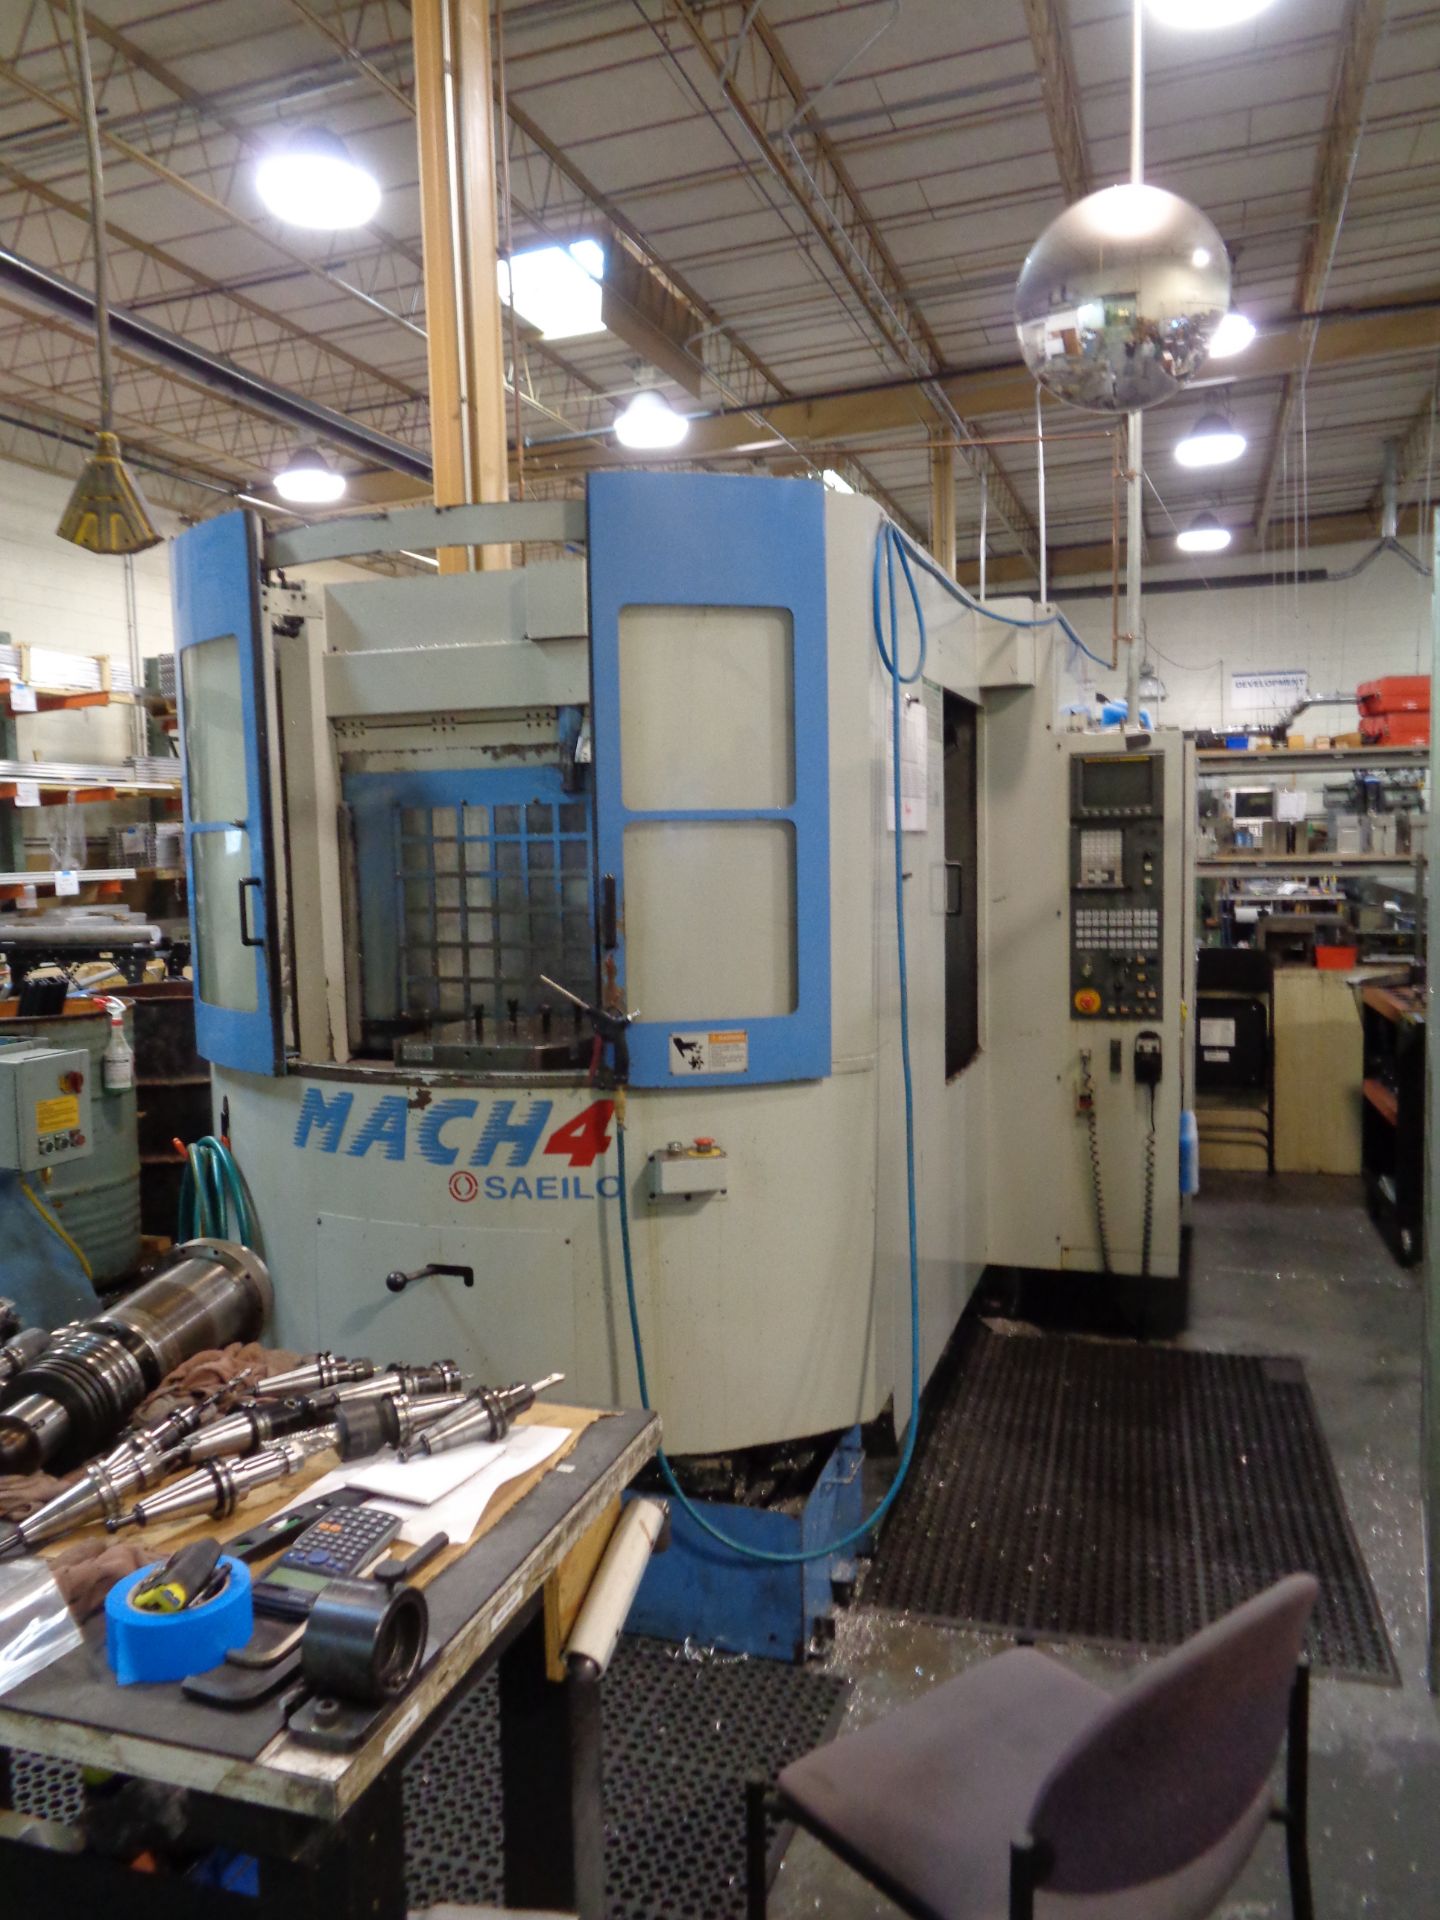 SAEILO Mach 4 Horizontal Cnc Machining Center - FANUC Control ( Being Sold Off Site ) - Image 13 of 14